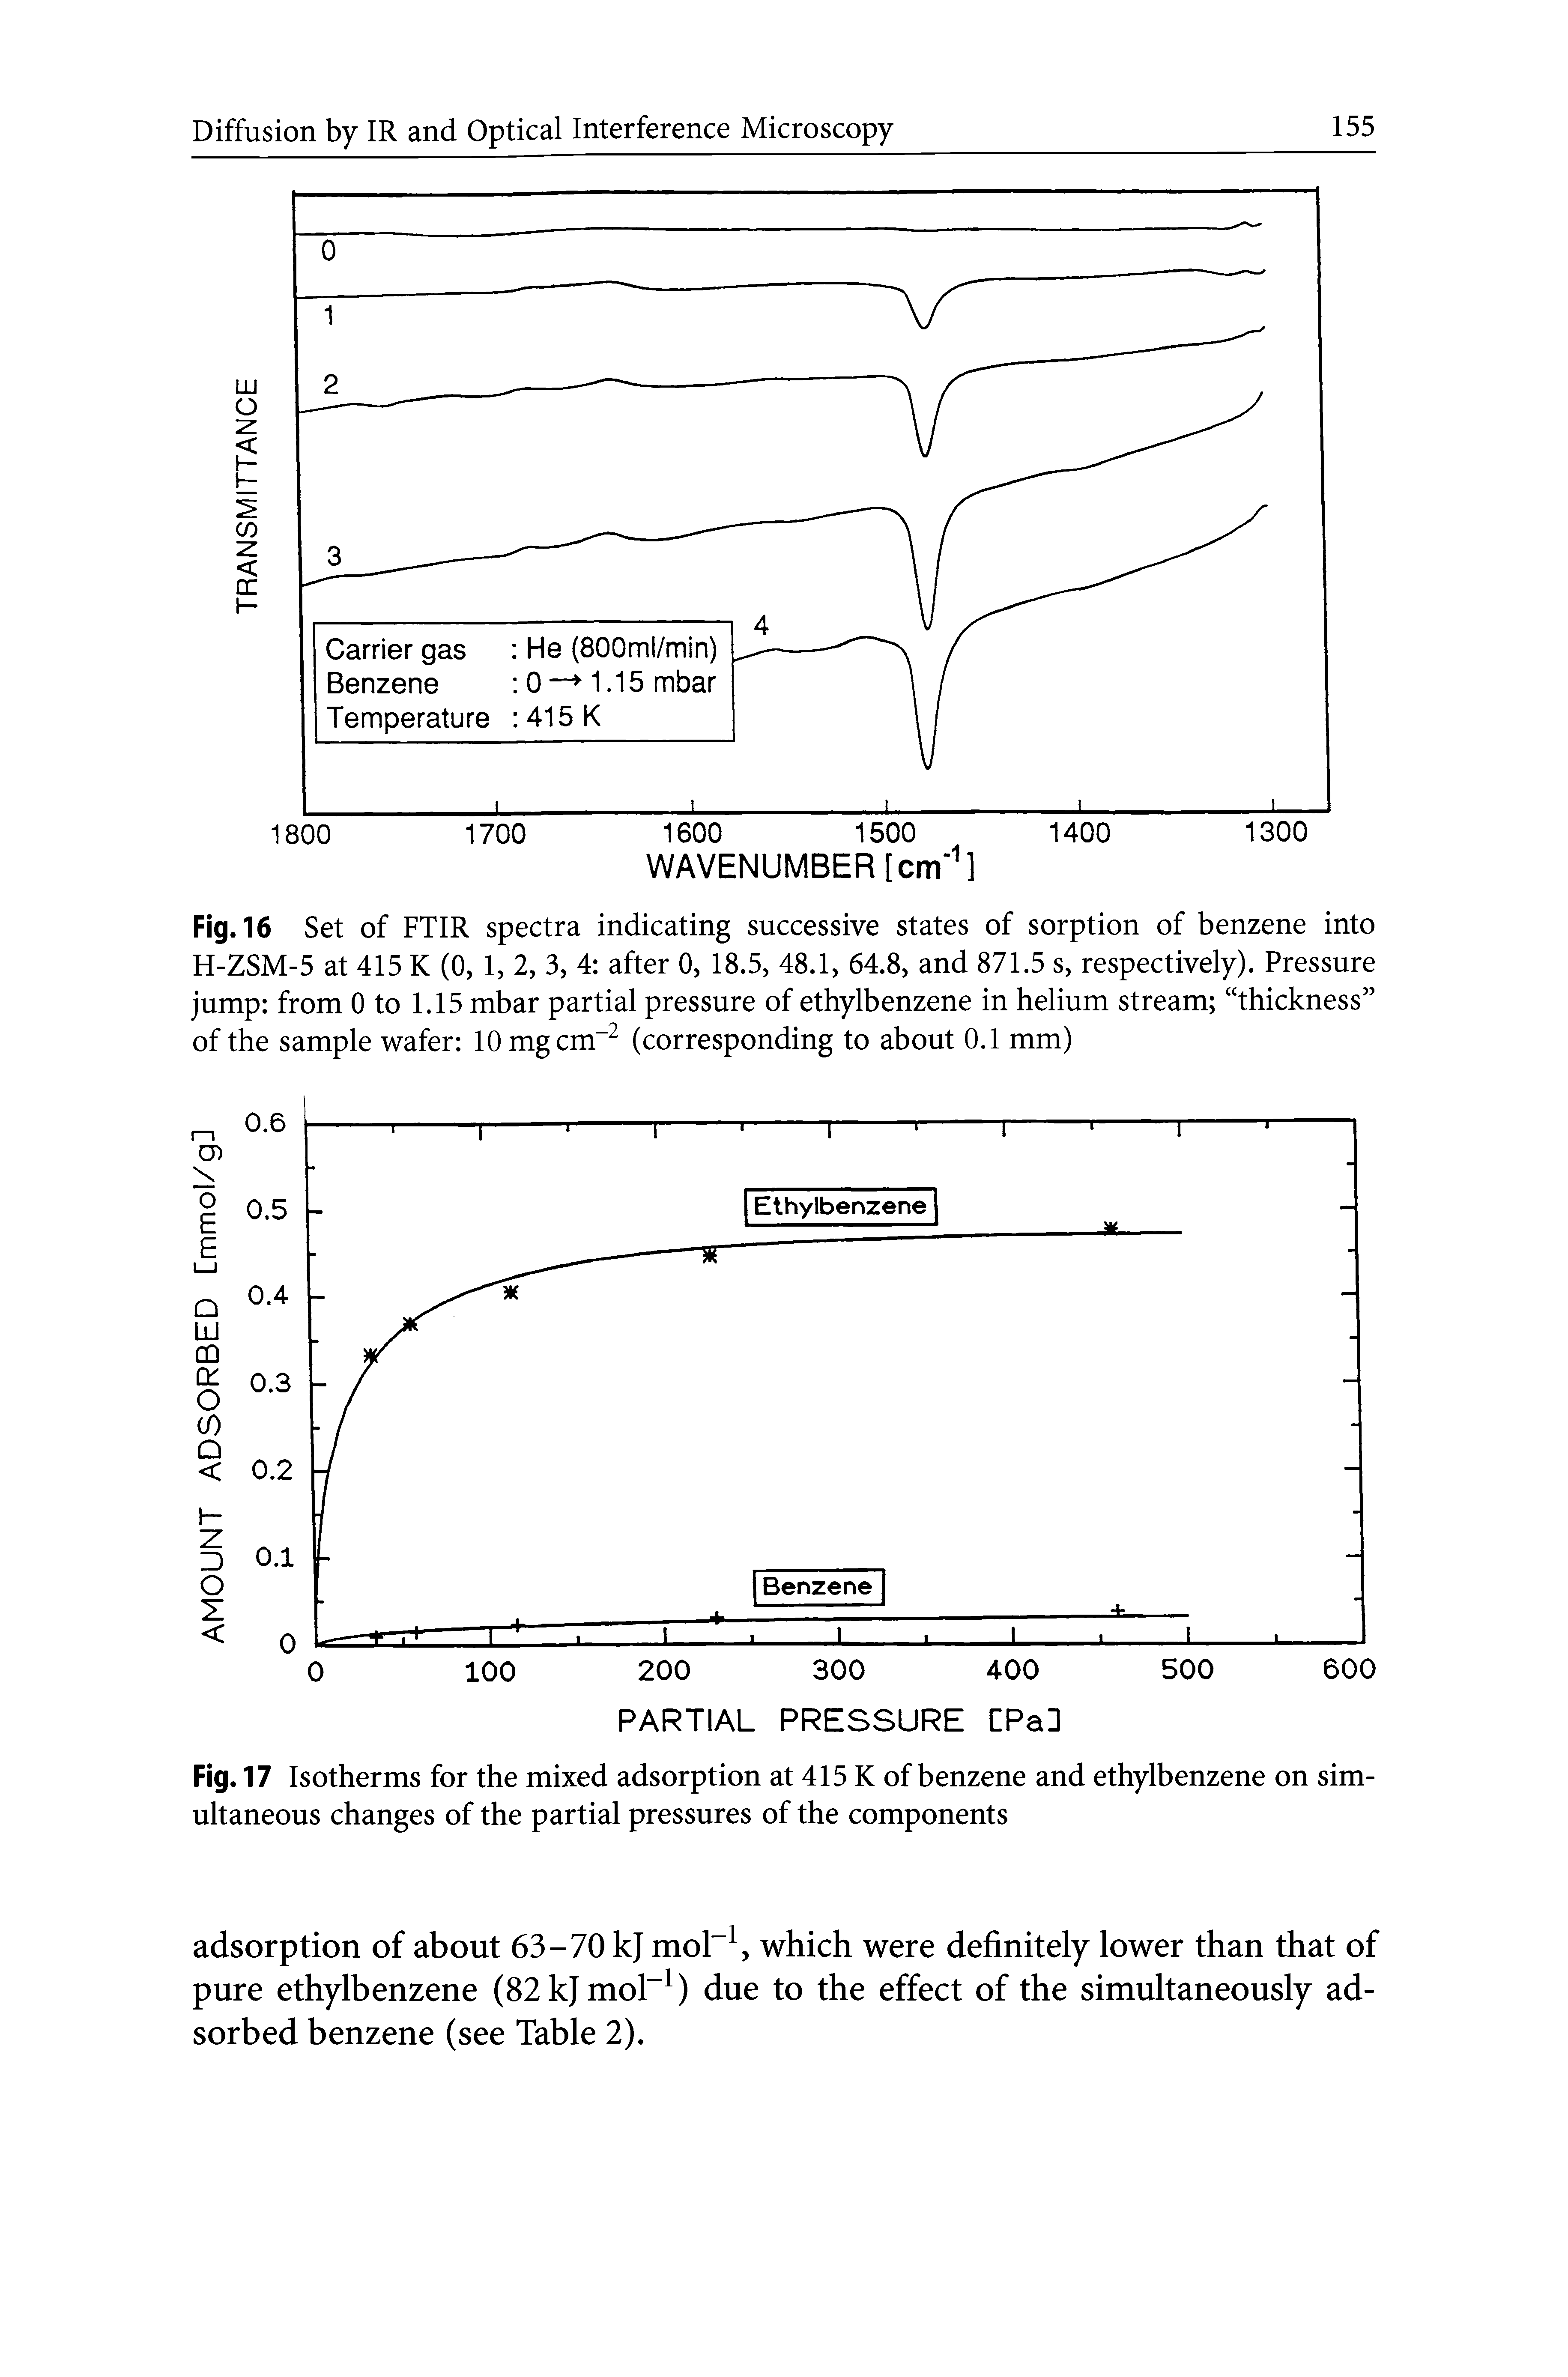 Fig. 16 Set of FTIR spectra indicating successive states of sorption of benzene into H-ZSM-5 at 415 K (0, 1, 2, 3, 4 after 0, 18.5, 48.1, 64.8, and 871.5 s, respectively). Pressure jump from 0 to 1.15 mbar partial pressure of ethylbenzene in helium stream thickness of the sample wafer 10 mgcm (corresponding to about 0.1 mm)...